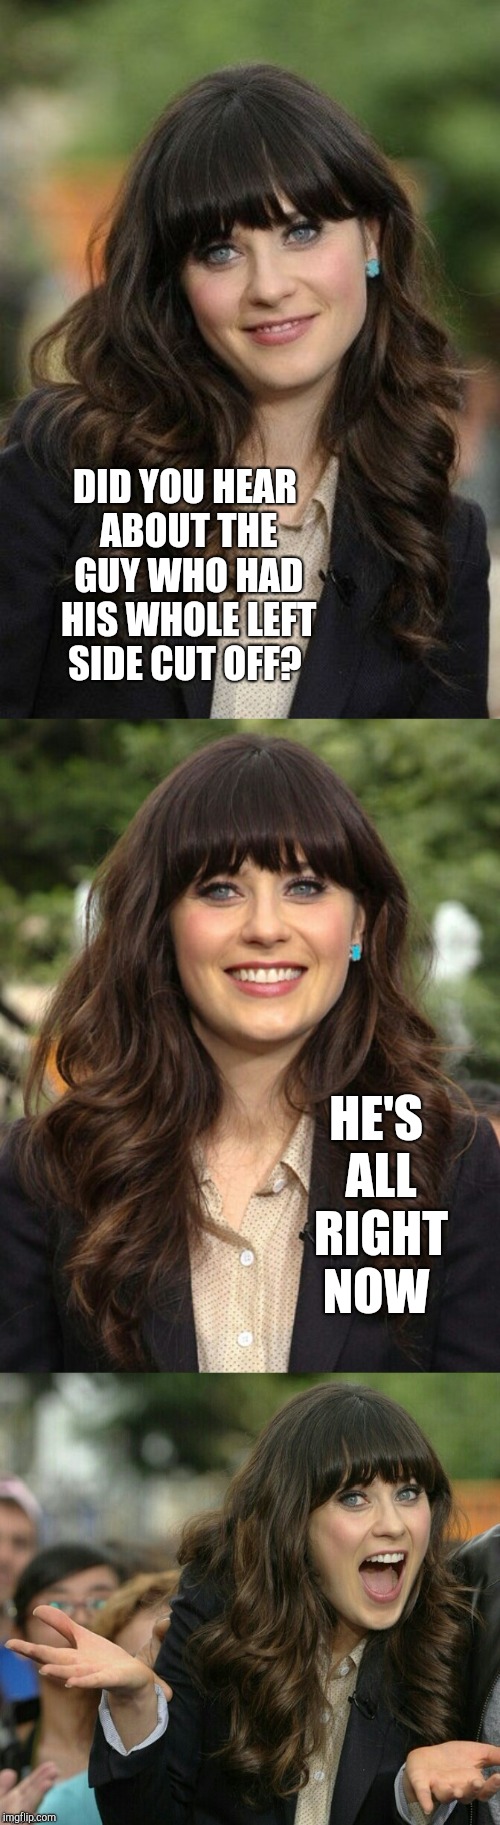 Zooey Deschanel joke template | DID YOU HEAR ABOUT THE GUY WHO HAD HIS WHOLE LEFT SIDE CUT OFF? HE'S ALL RIGHT NOW | image tagged in zooey deschanel joke template,zooey deschanel,jbmemegeek,bad puns,corny joke | made w/ Imgflip meme maker